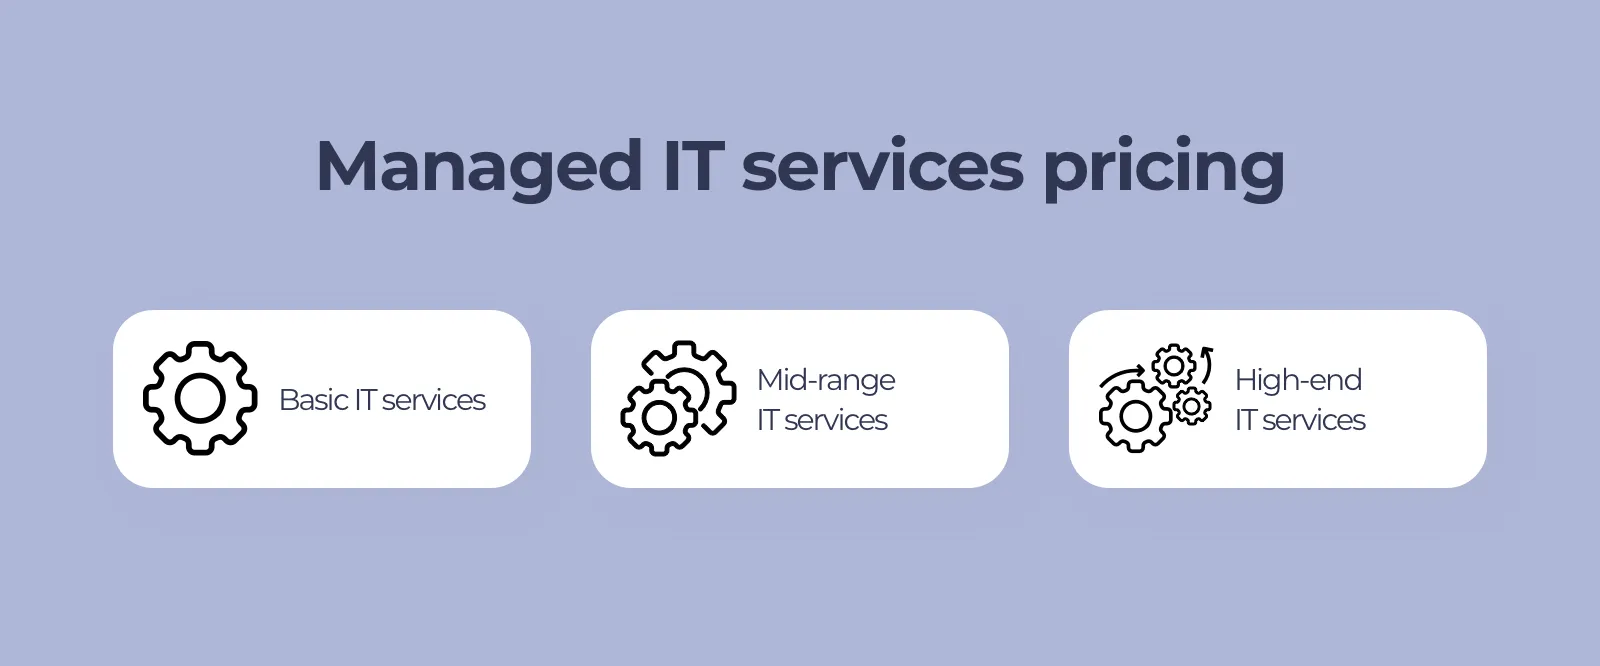 Cost of managed IT services